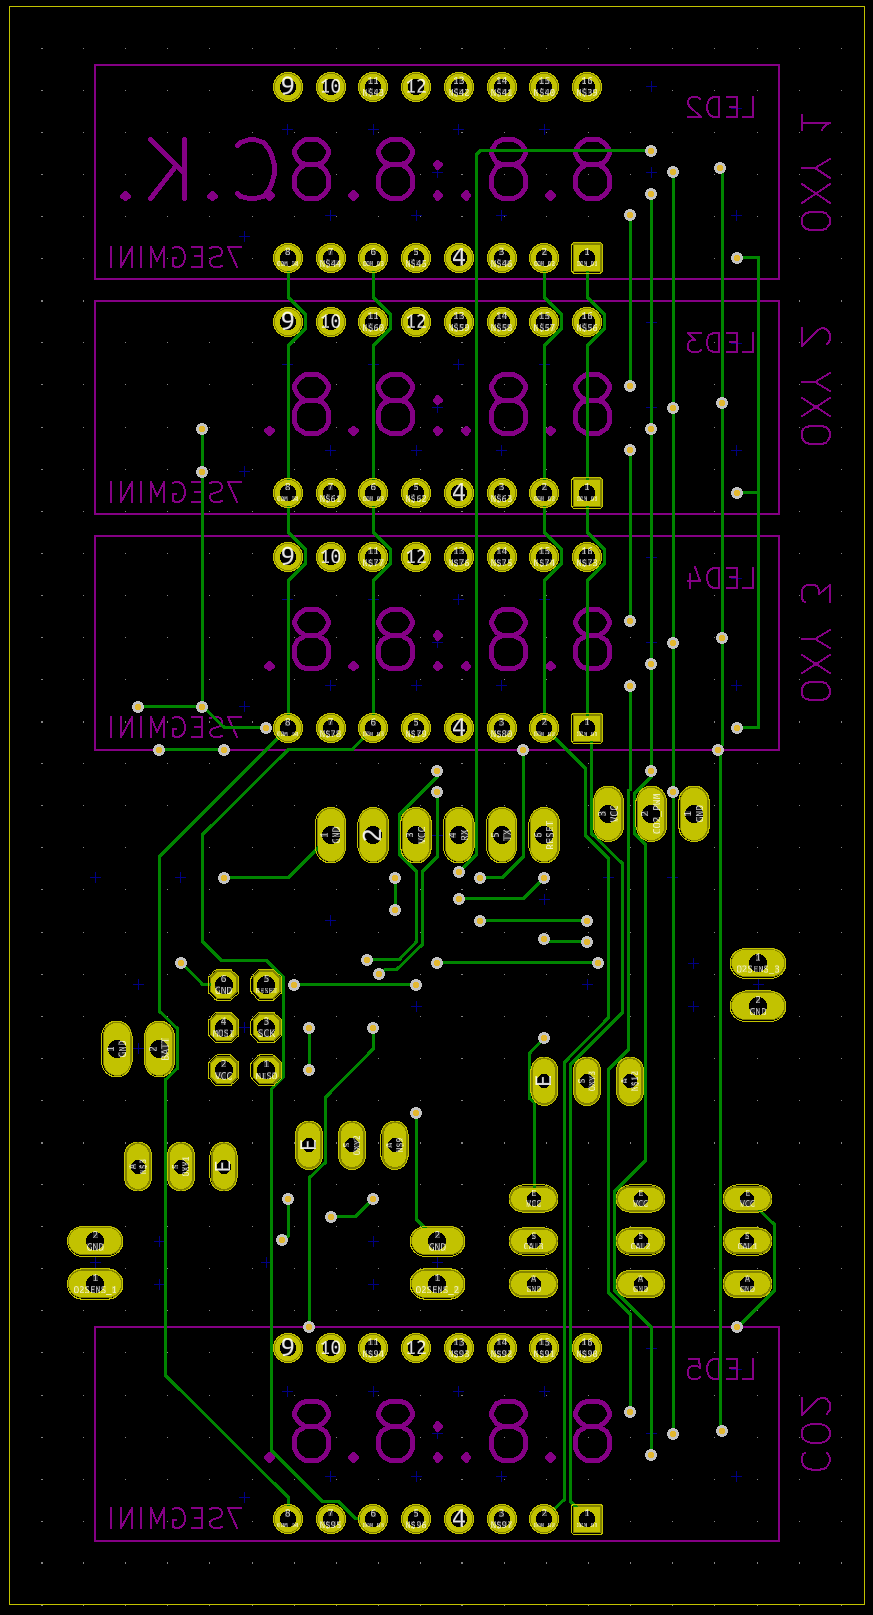 The layout of the back side of the board